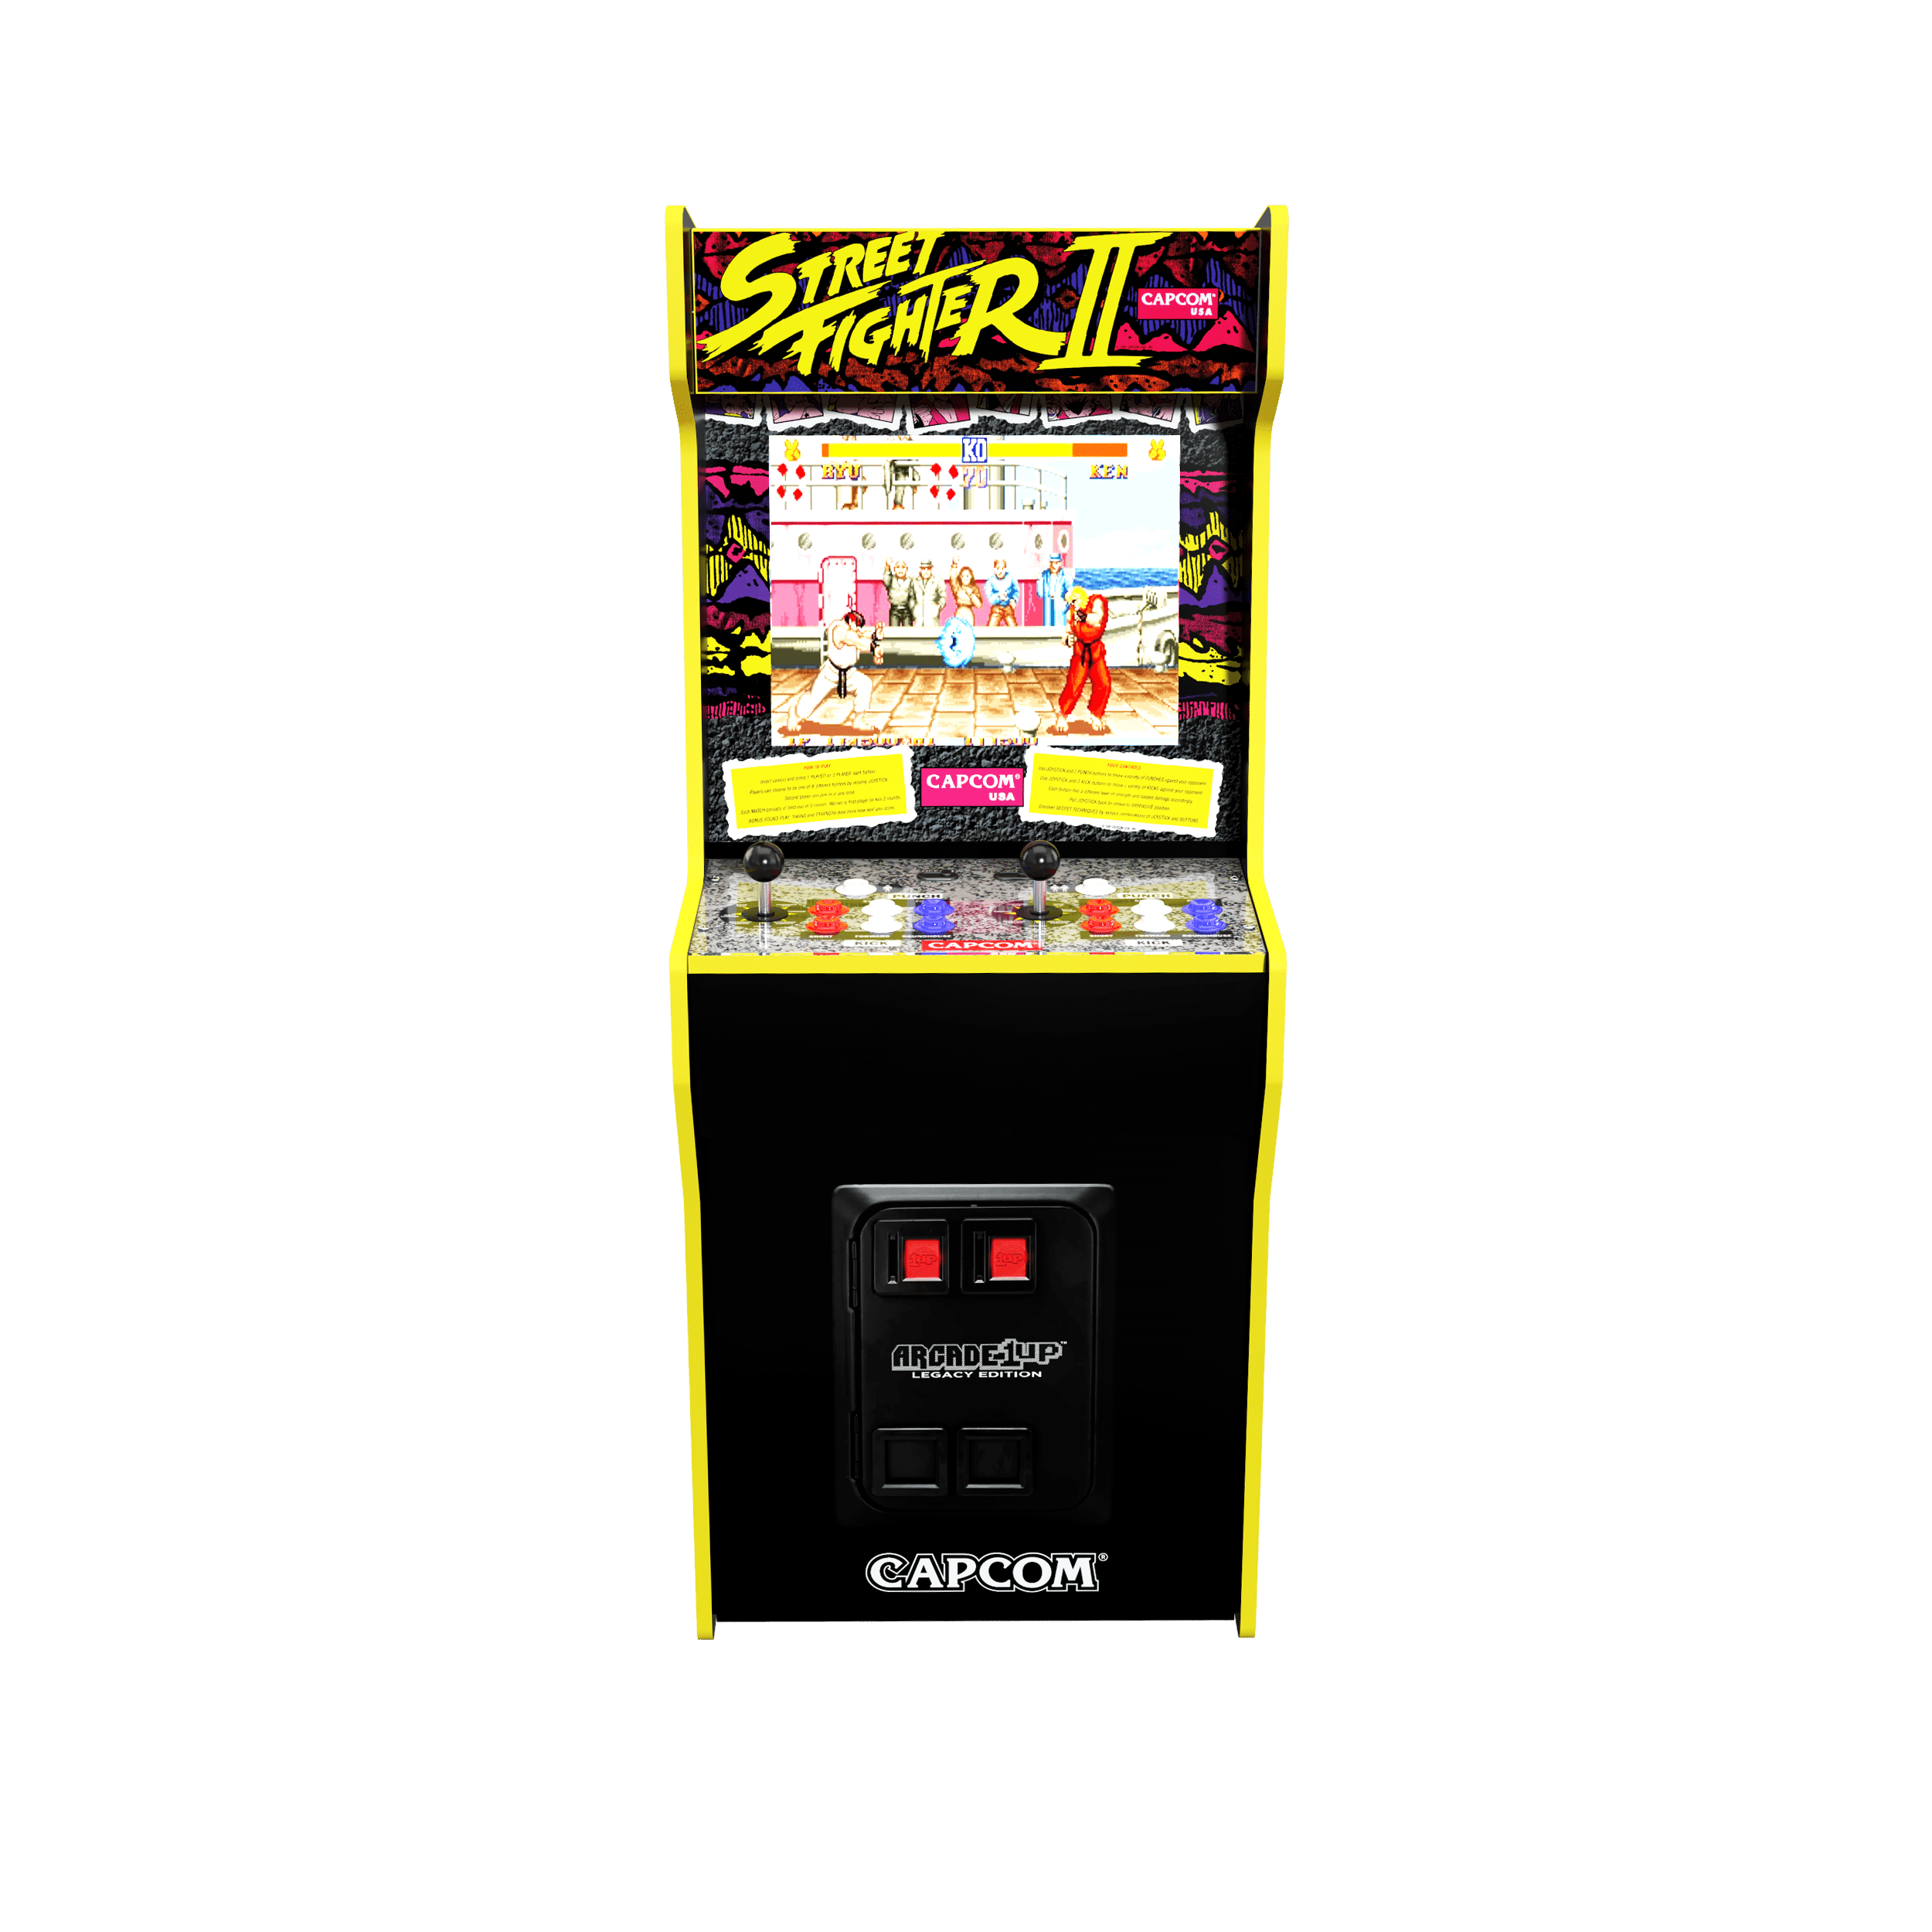 CNY Flash Deal! Arcade1Up: Street Fighter - Classic 3in1 Home Arcade (4ft)  – Games Crazy Deals